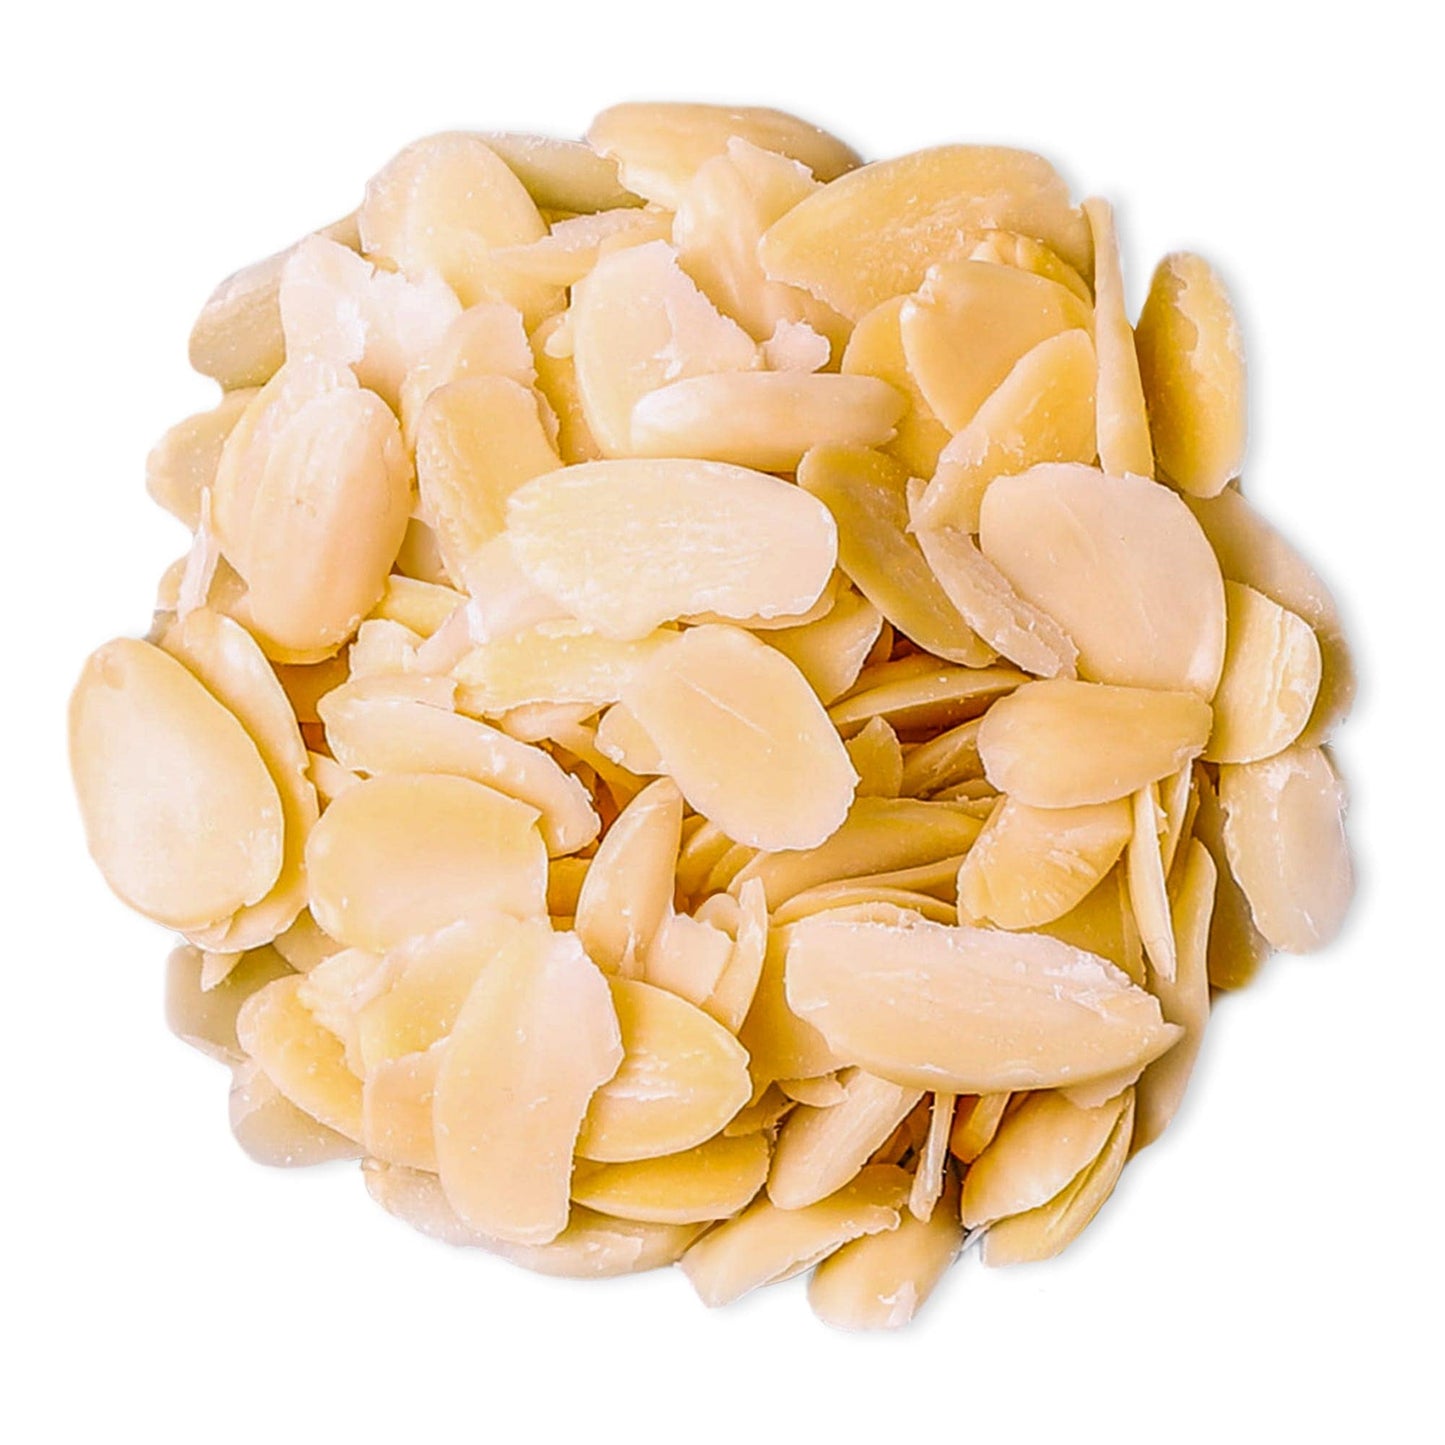 Organic Toasted Blanched Sliced Almonds – Unsalted & Dry Roasted, Premium Non-GMO Almond Nuts, Perfect for Salads, Snacks, Baking and Crunchy Topping. Keto & Paleo Friendly. Vegan & Kosher